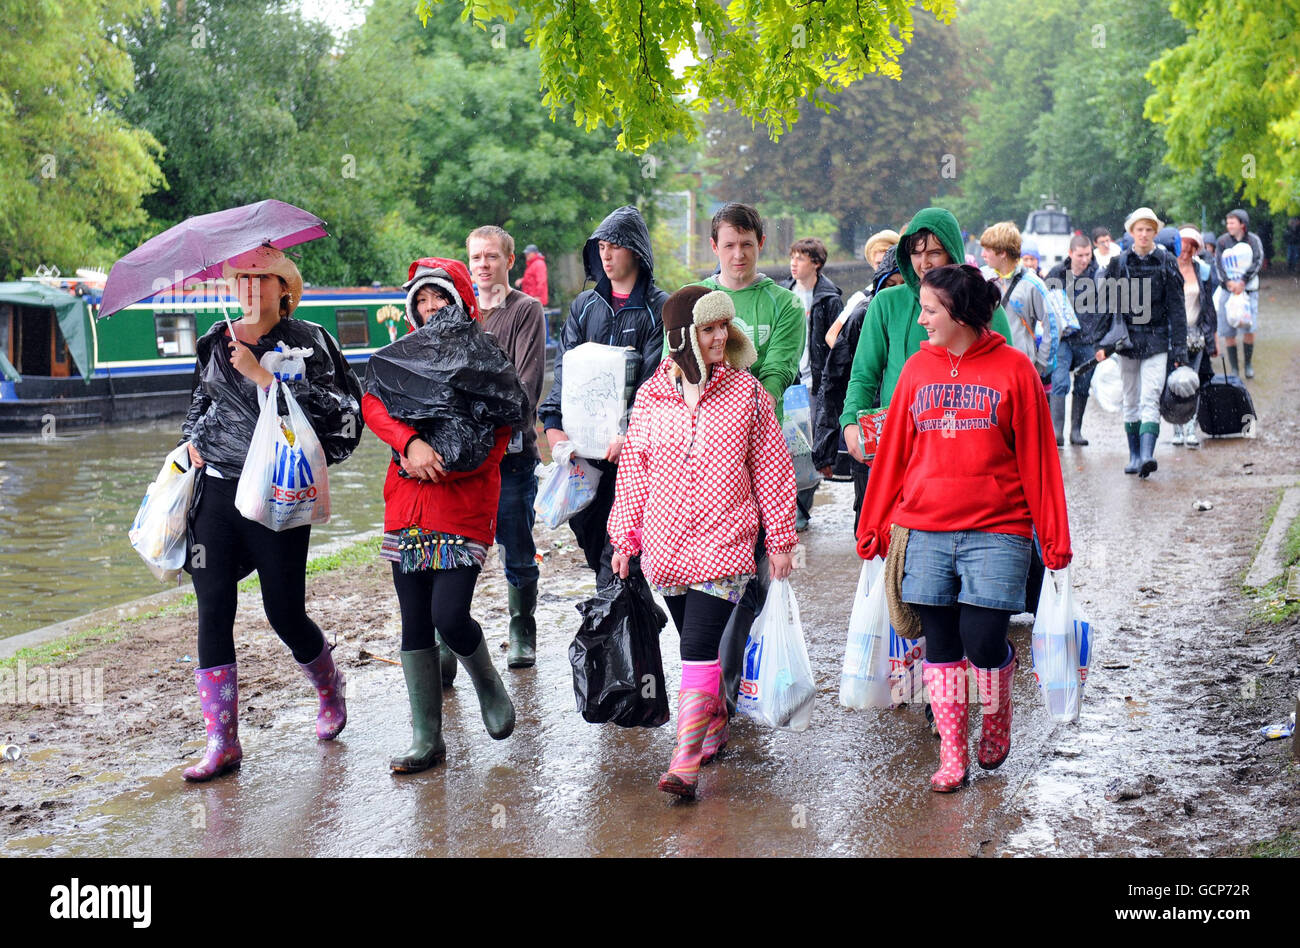 Reading Festival-goers make their way along a muddy Thames towpath from the drop point in the town to the site venue where they will set up camp for the music event this Bank Holiday weekend. Stock Photo